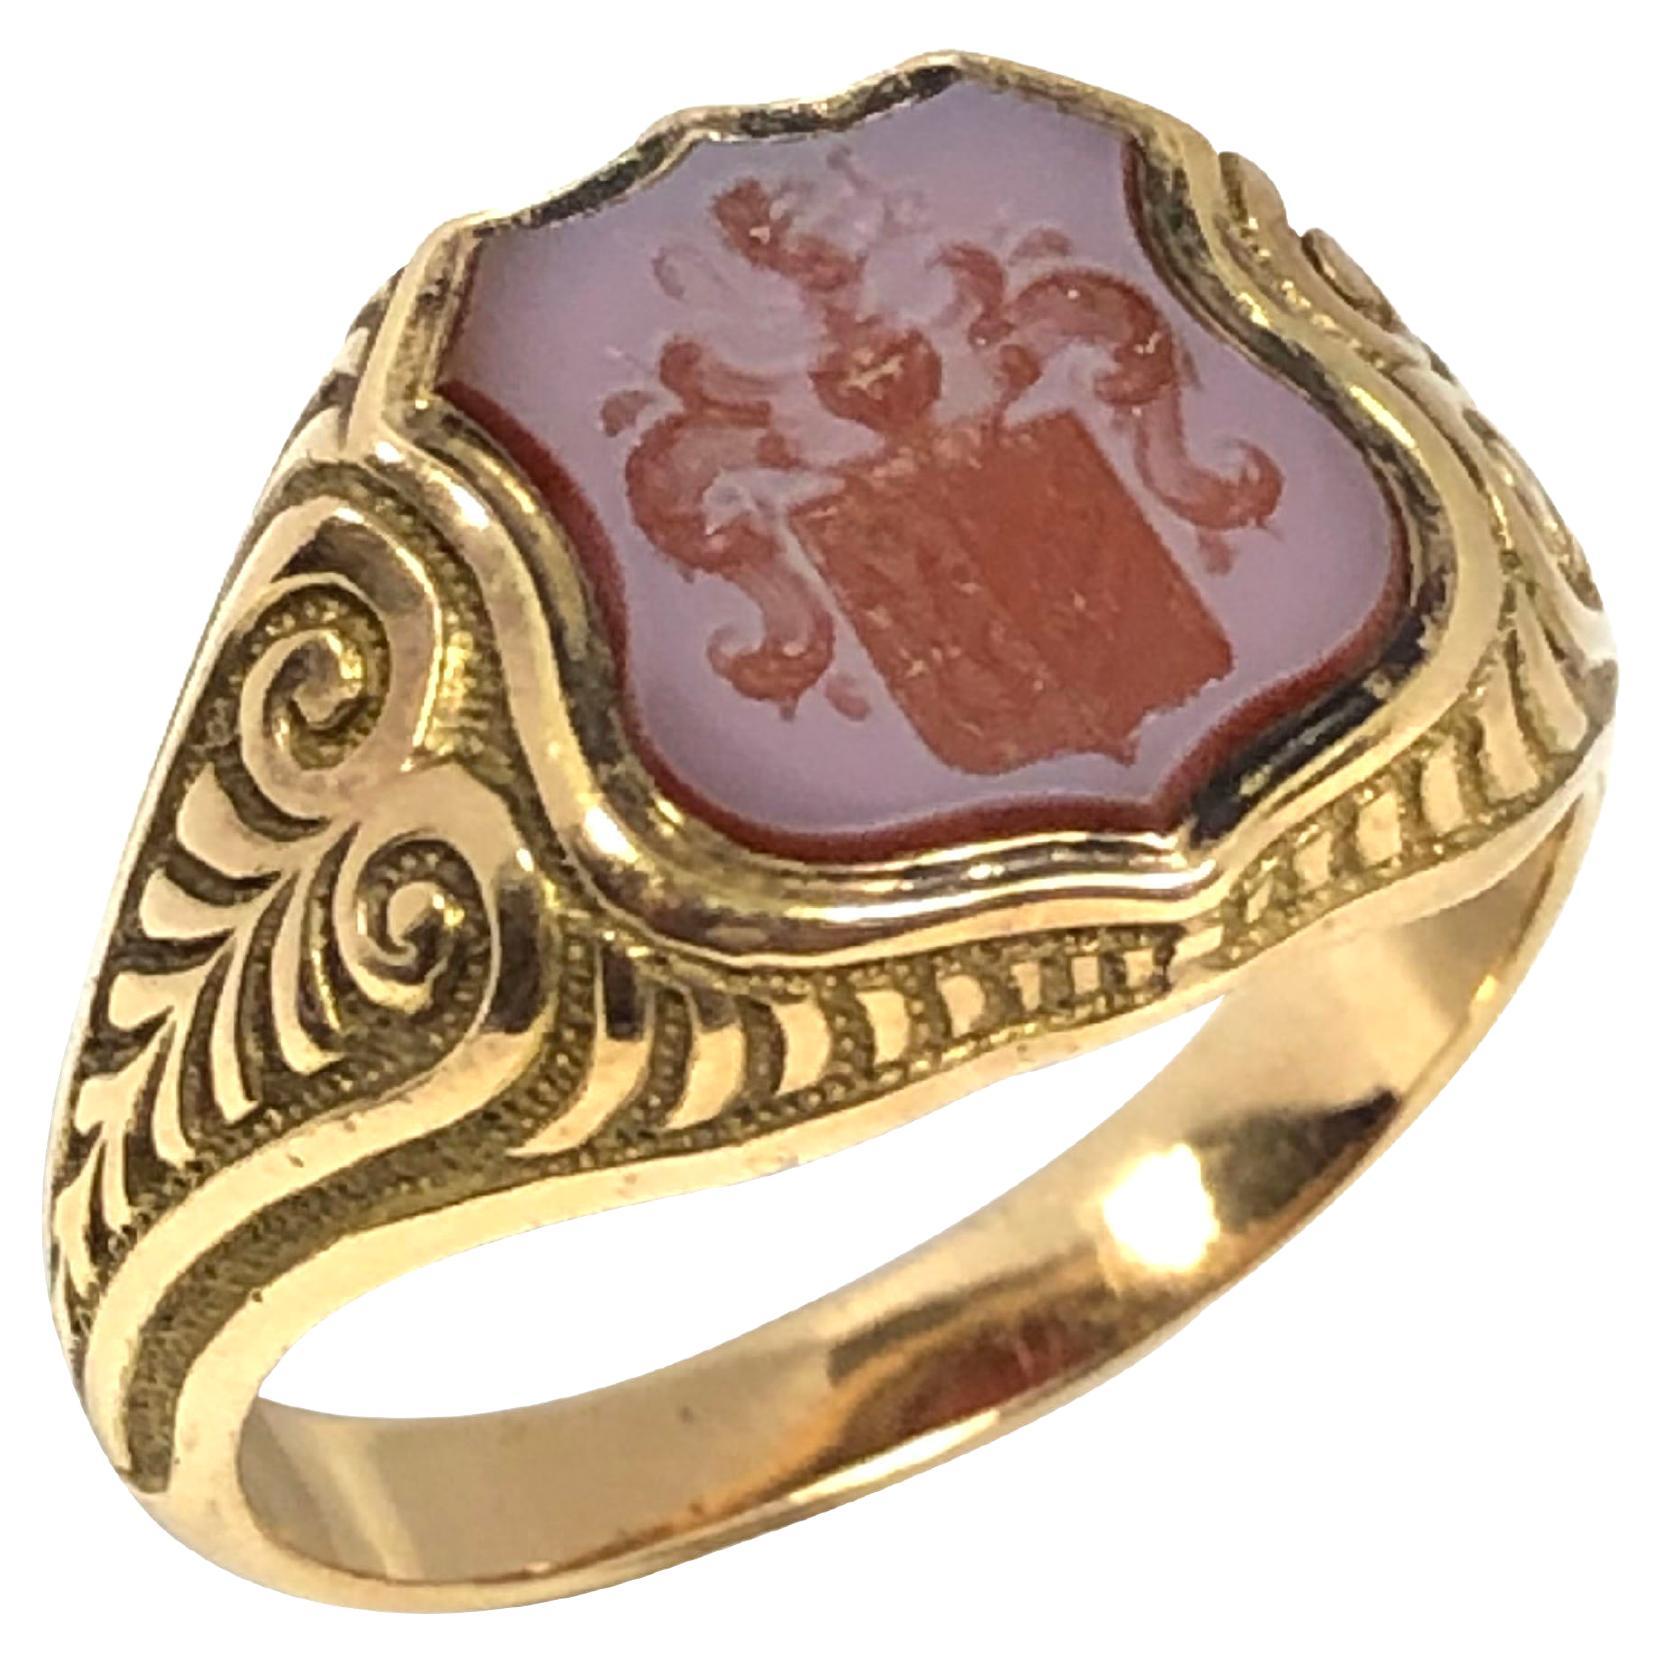 Women's or Men's Fine Antique Gold and Shield Shape Agate Signet Crest Ring 